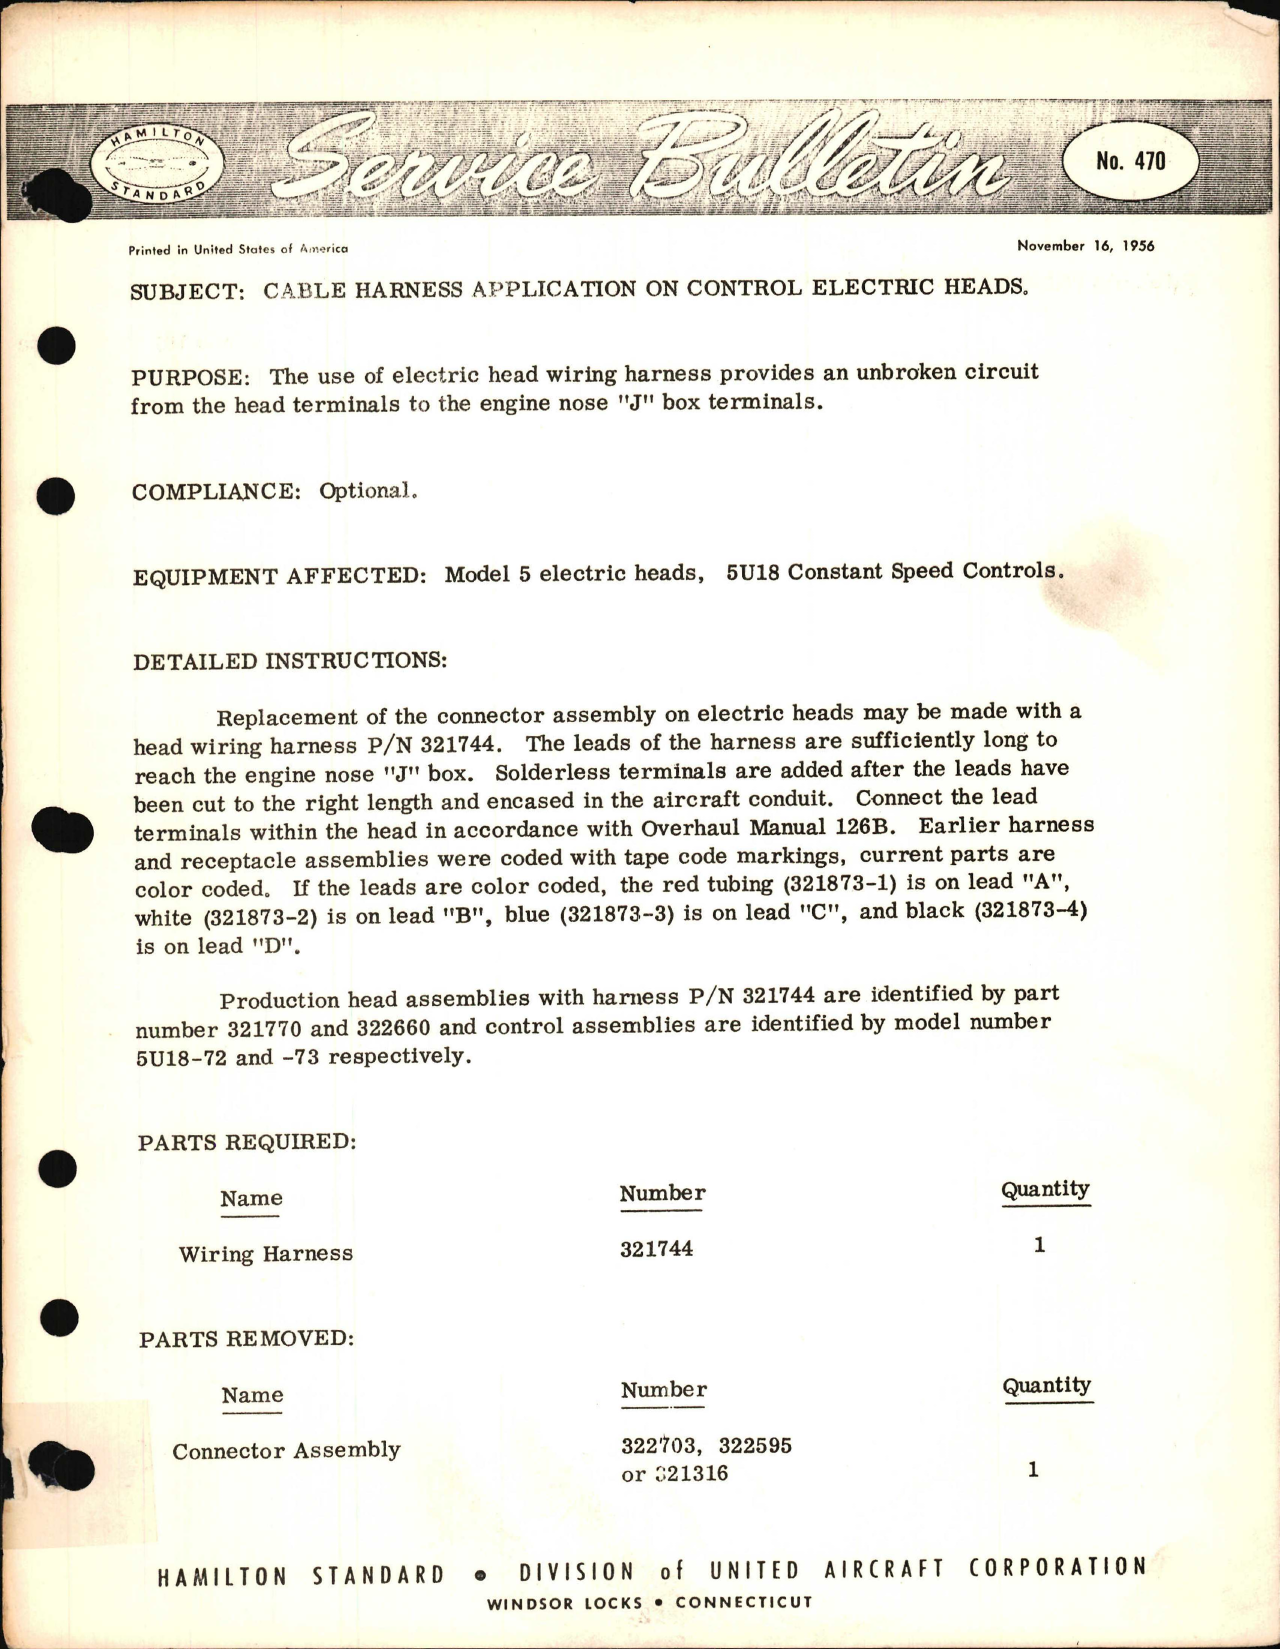 Sample page 1 from AirCorps Library document: Cable Harness Application on Control Electric Heads